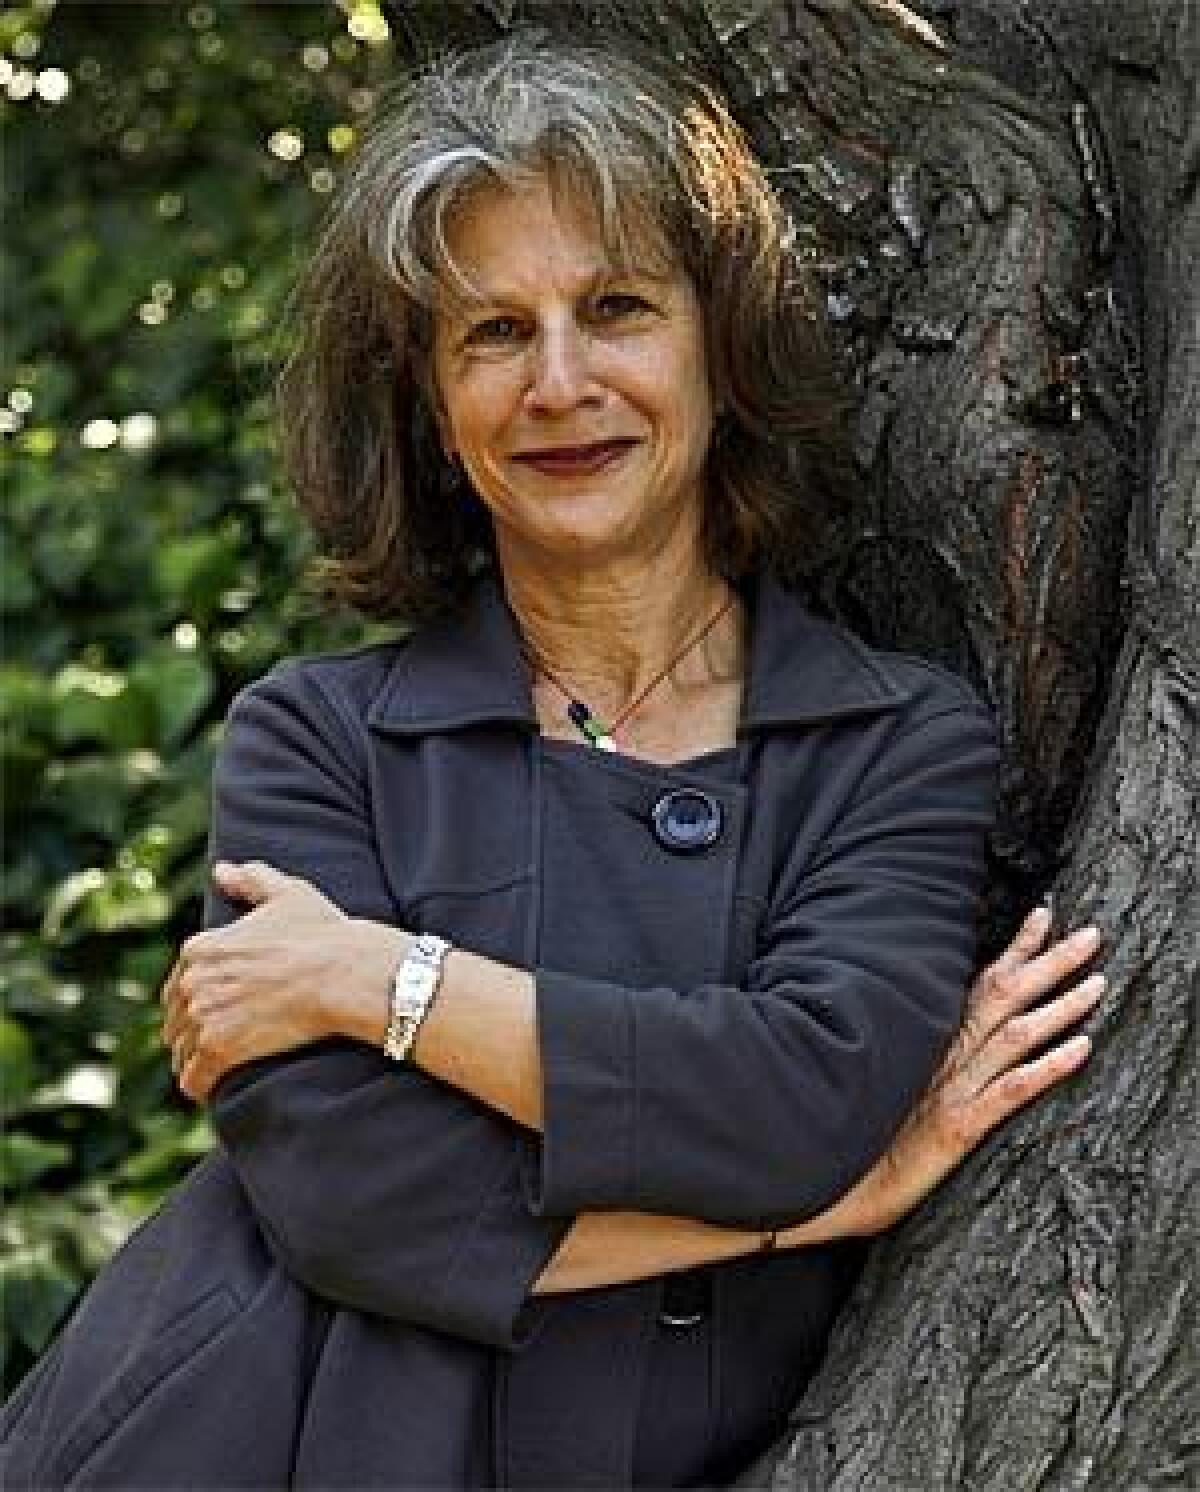 Louise Steinman, author of THE SOUVENIR: A Daughter Discovers Her Father's War, at her Los Angeles, Ca. home. Steinman is also the cultural programs director with the Library Foundation of Los Angeles.